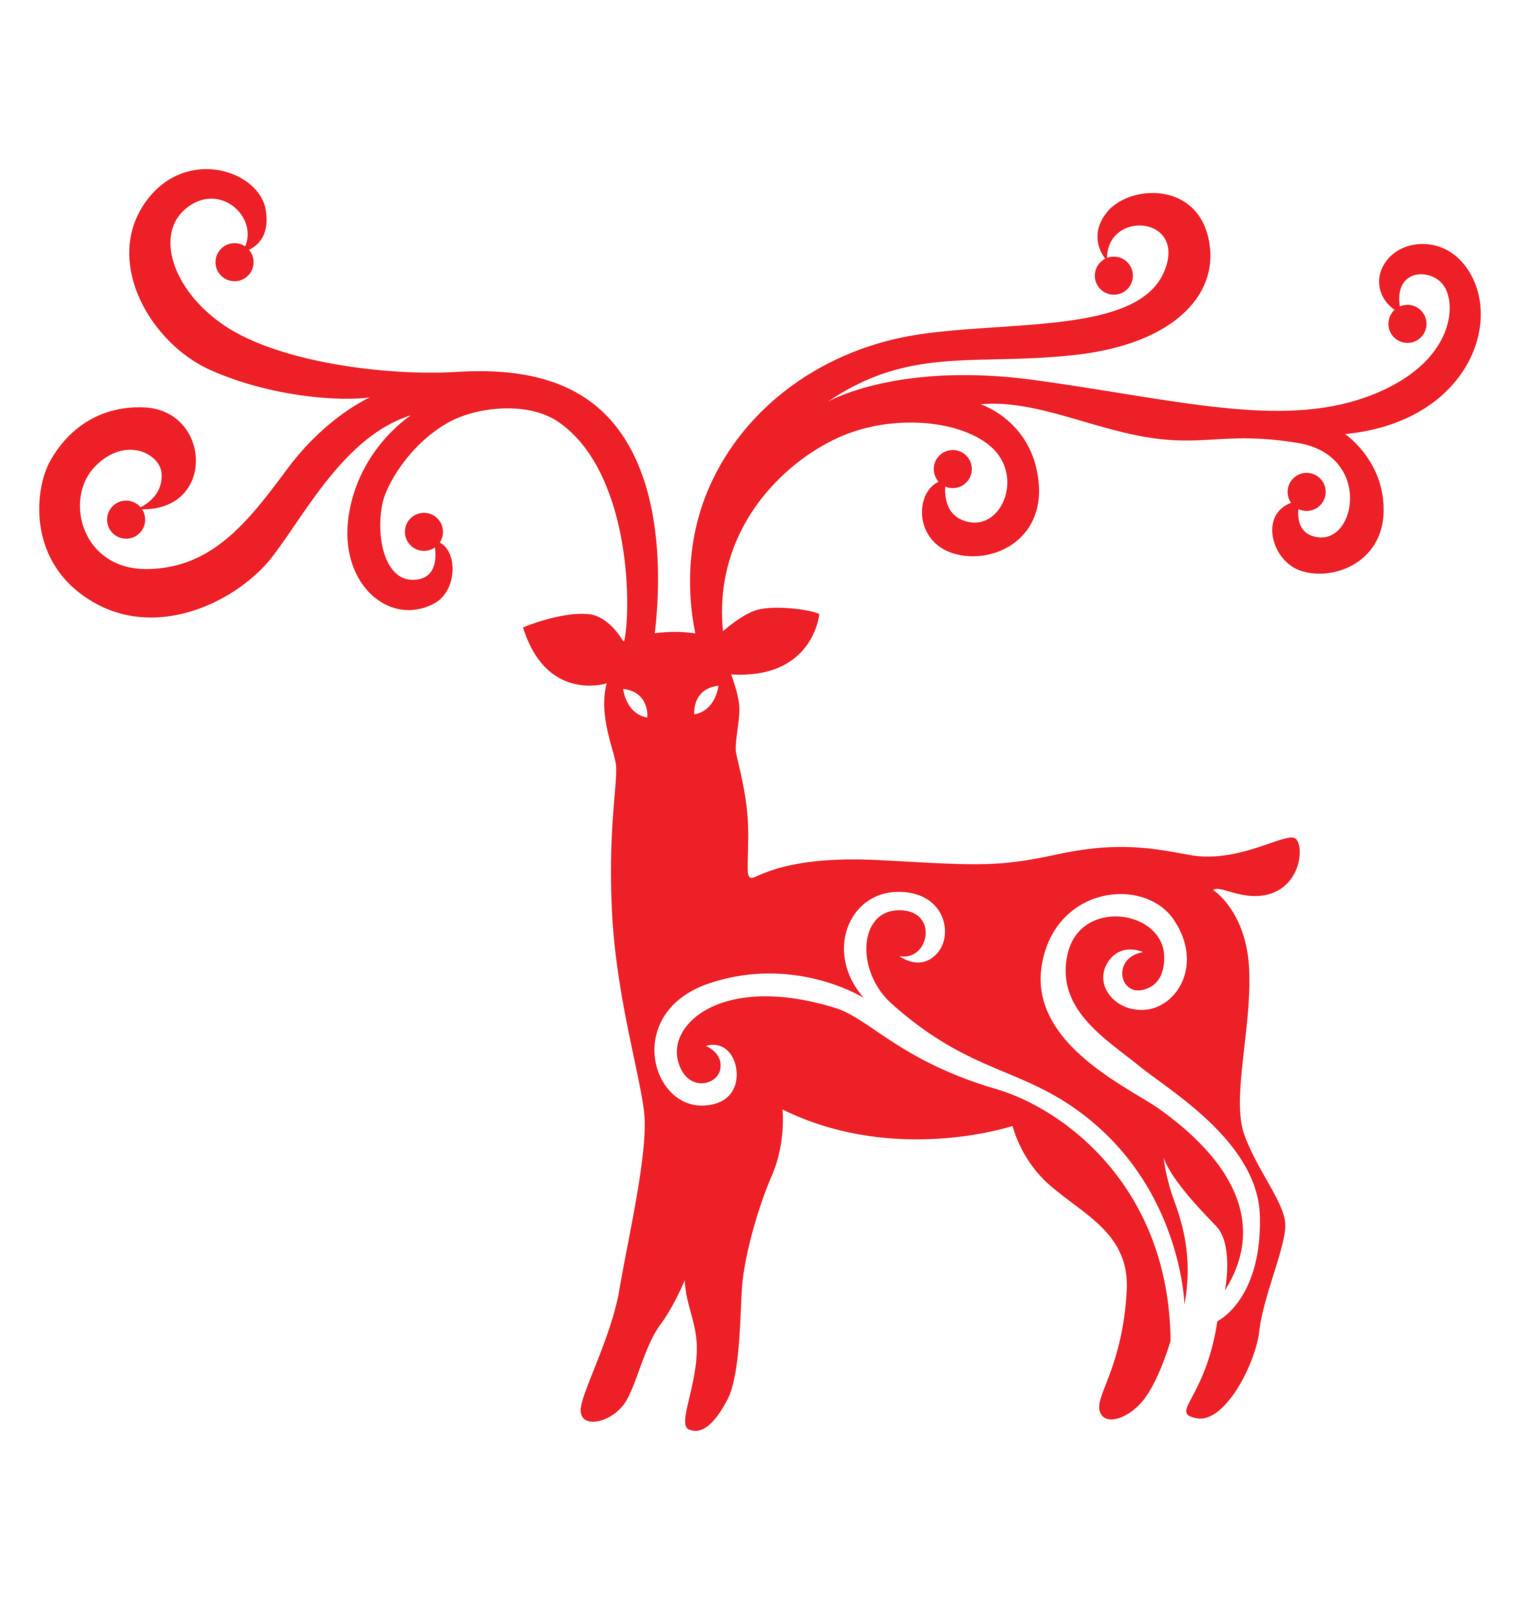 A reindeer illustrated with swirls decoration for Christmas season.